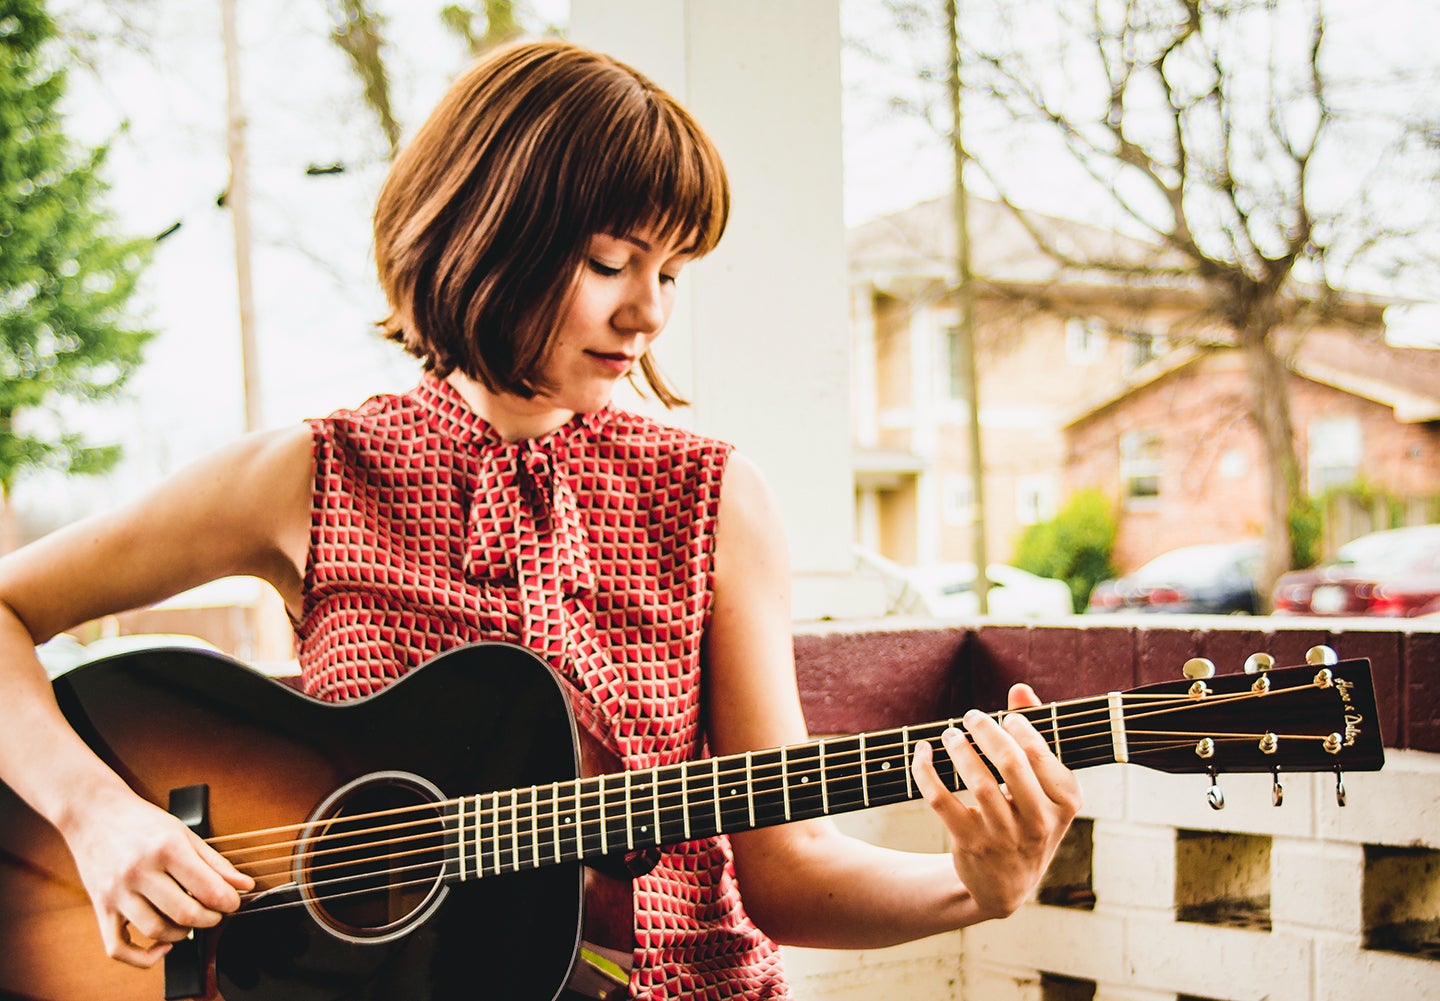 Multiinstrumentalist and awardwinner Molly Tuttle to perform at the